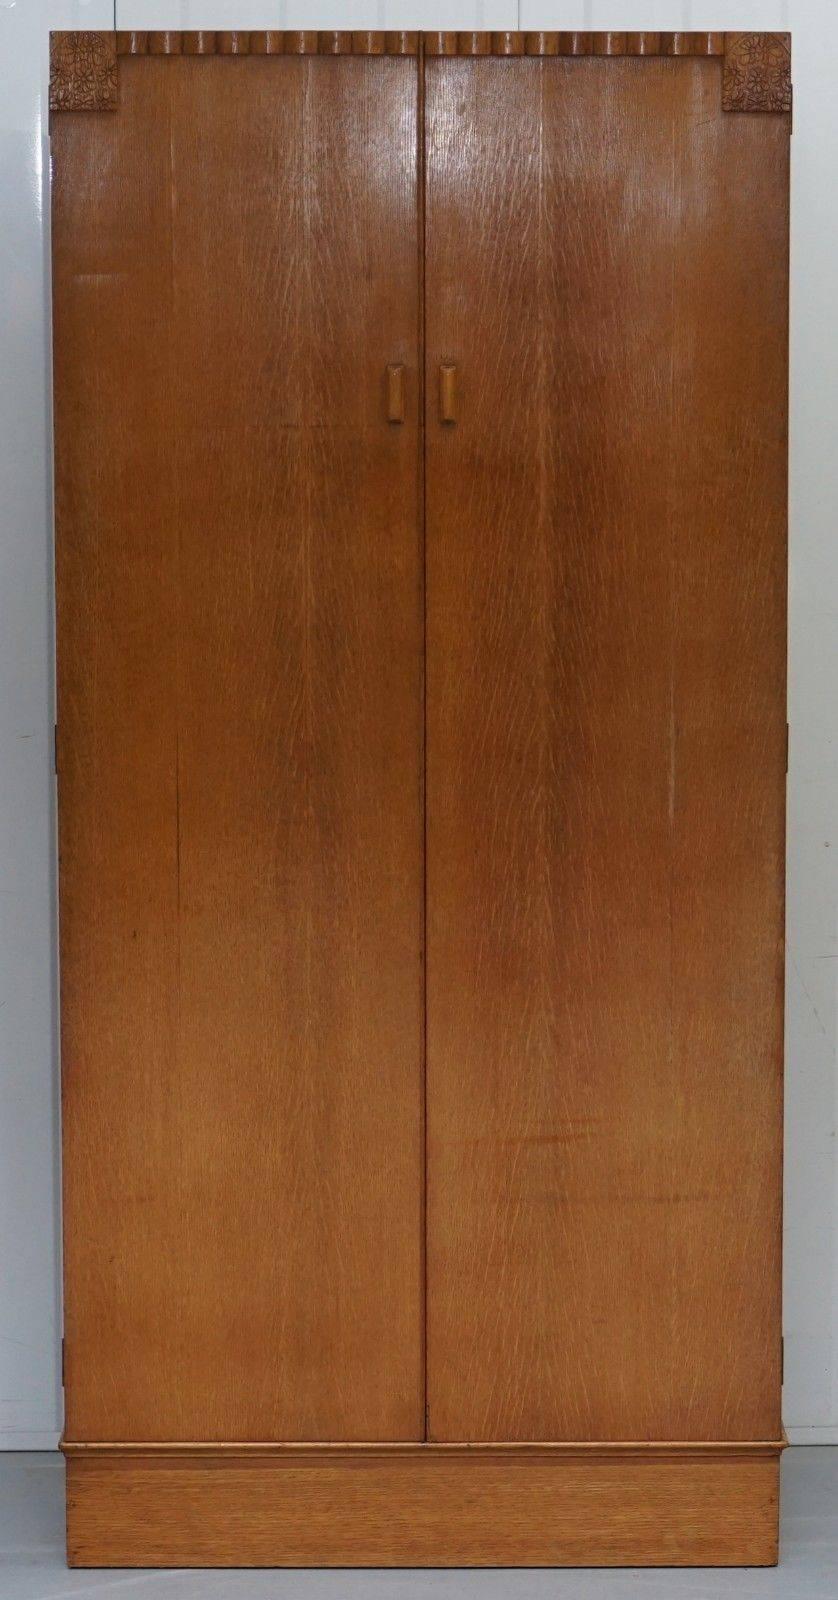 We are delighted to offer for sale this lovely handmade in England satin oak medium sized compendium wardrobe with floral carved detailing

A very good looking and well-made piece in period condition, there’s lots of space for folded clothing, a